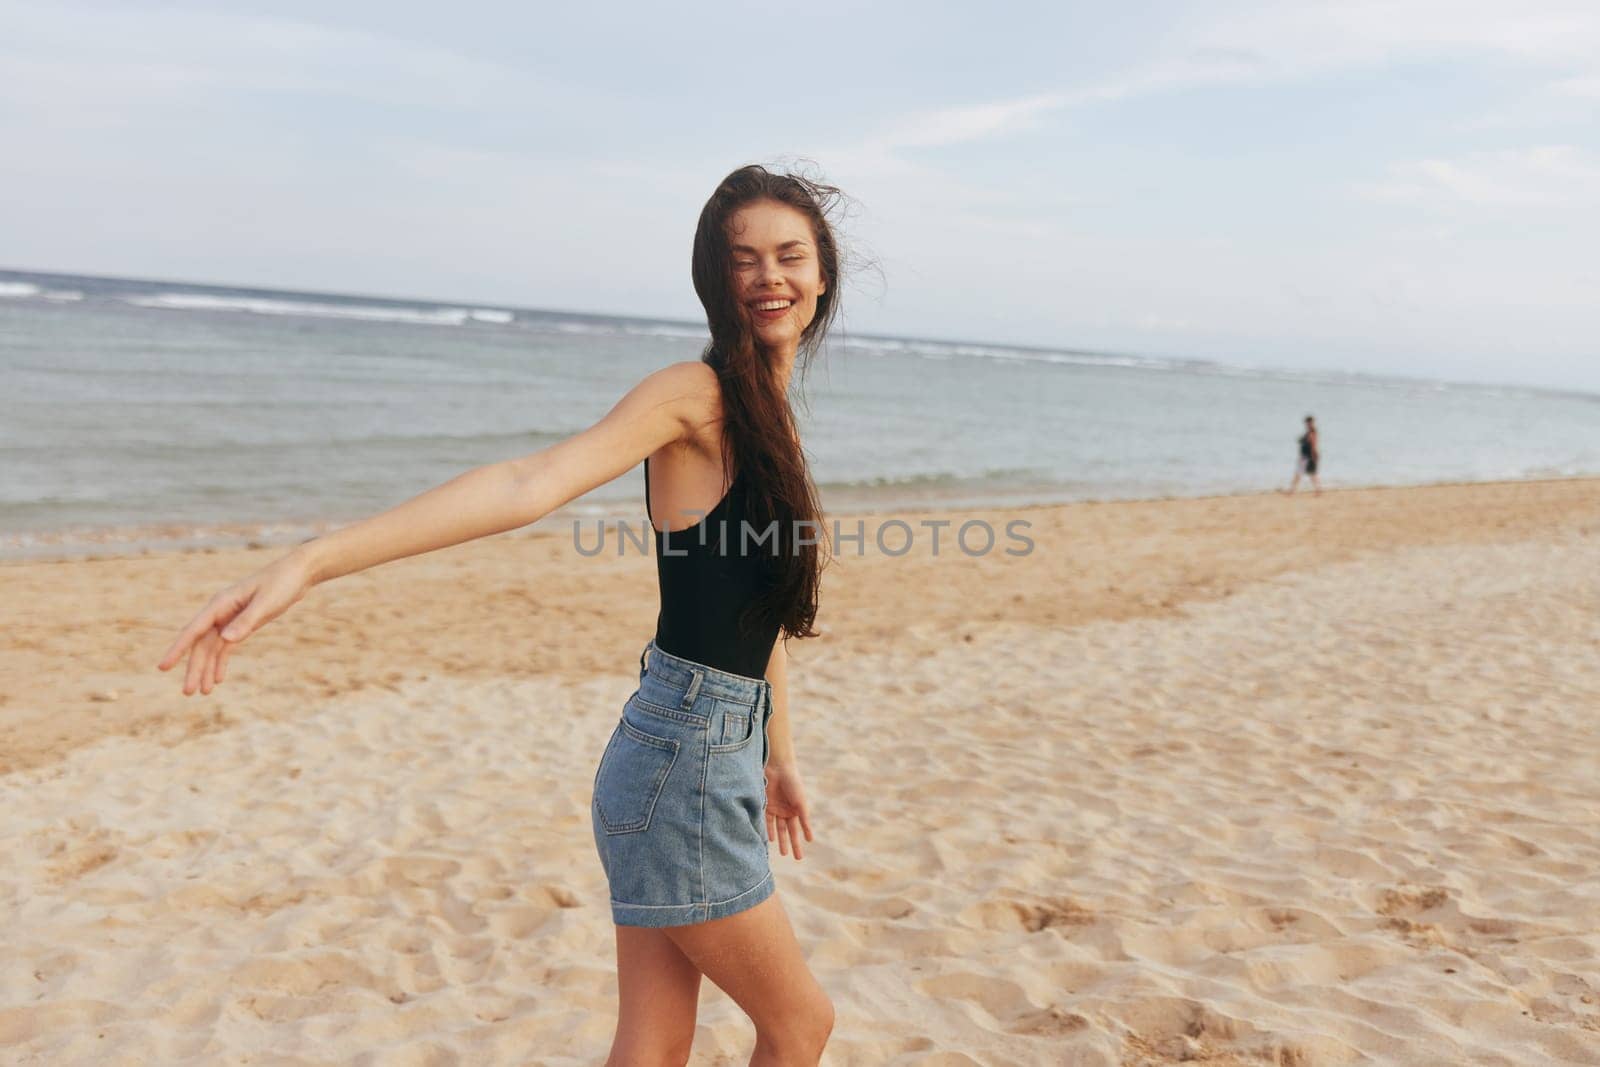 woman relax sand ocean copy-space summer dress smile sky girl female vacation carefree sunset walk lifestyle sea beach peaceful smiling jean